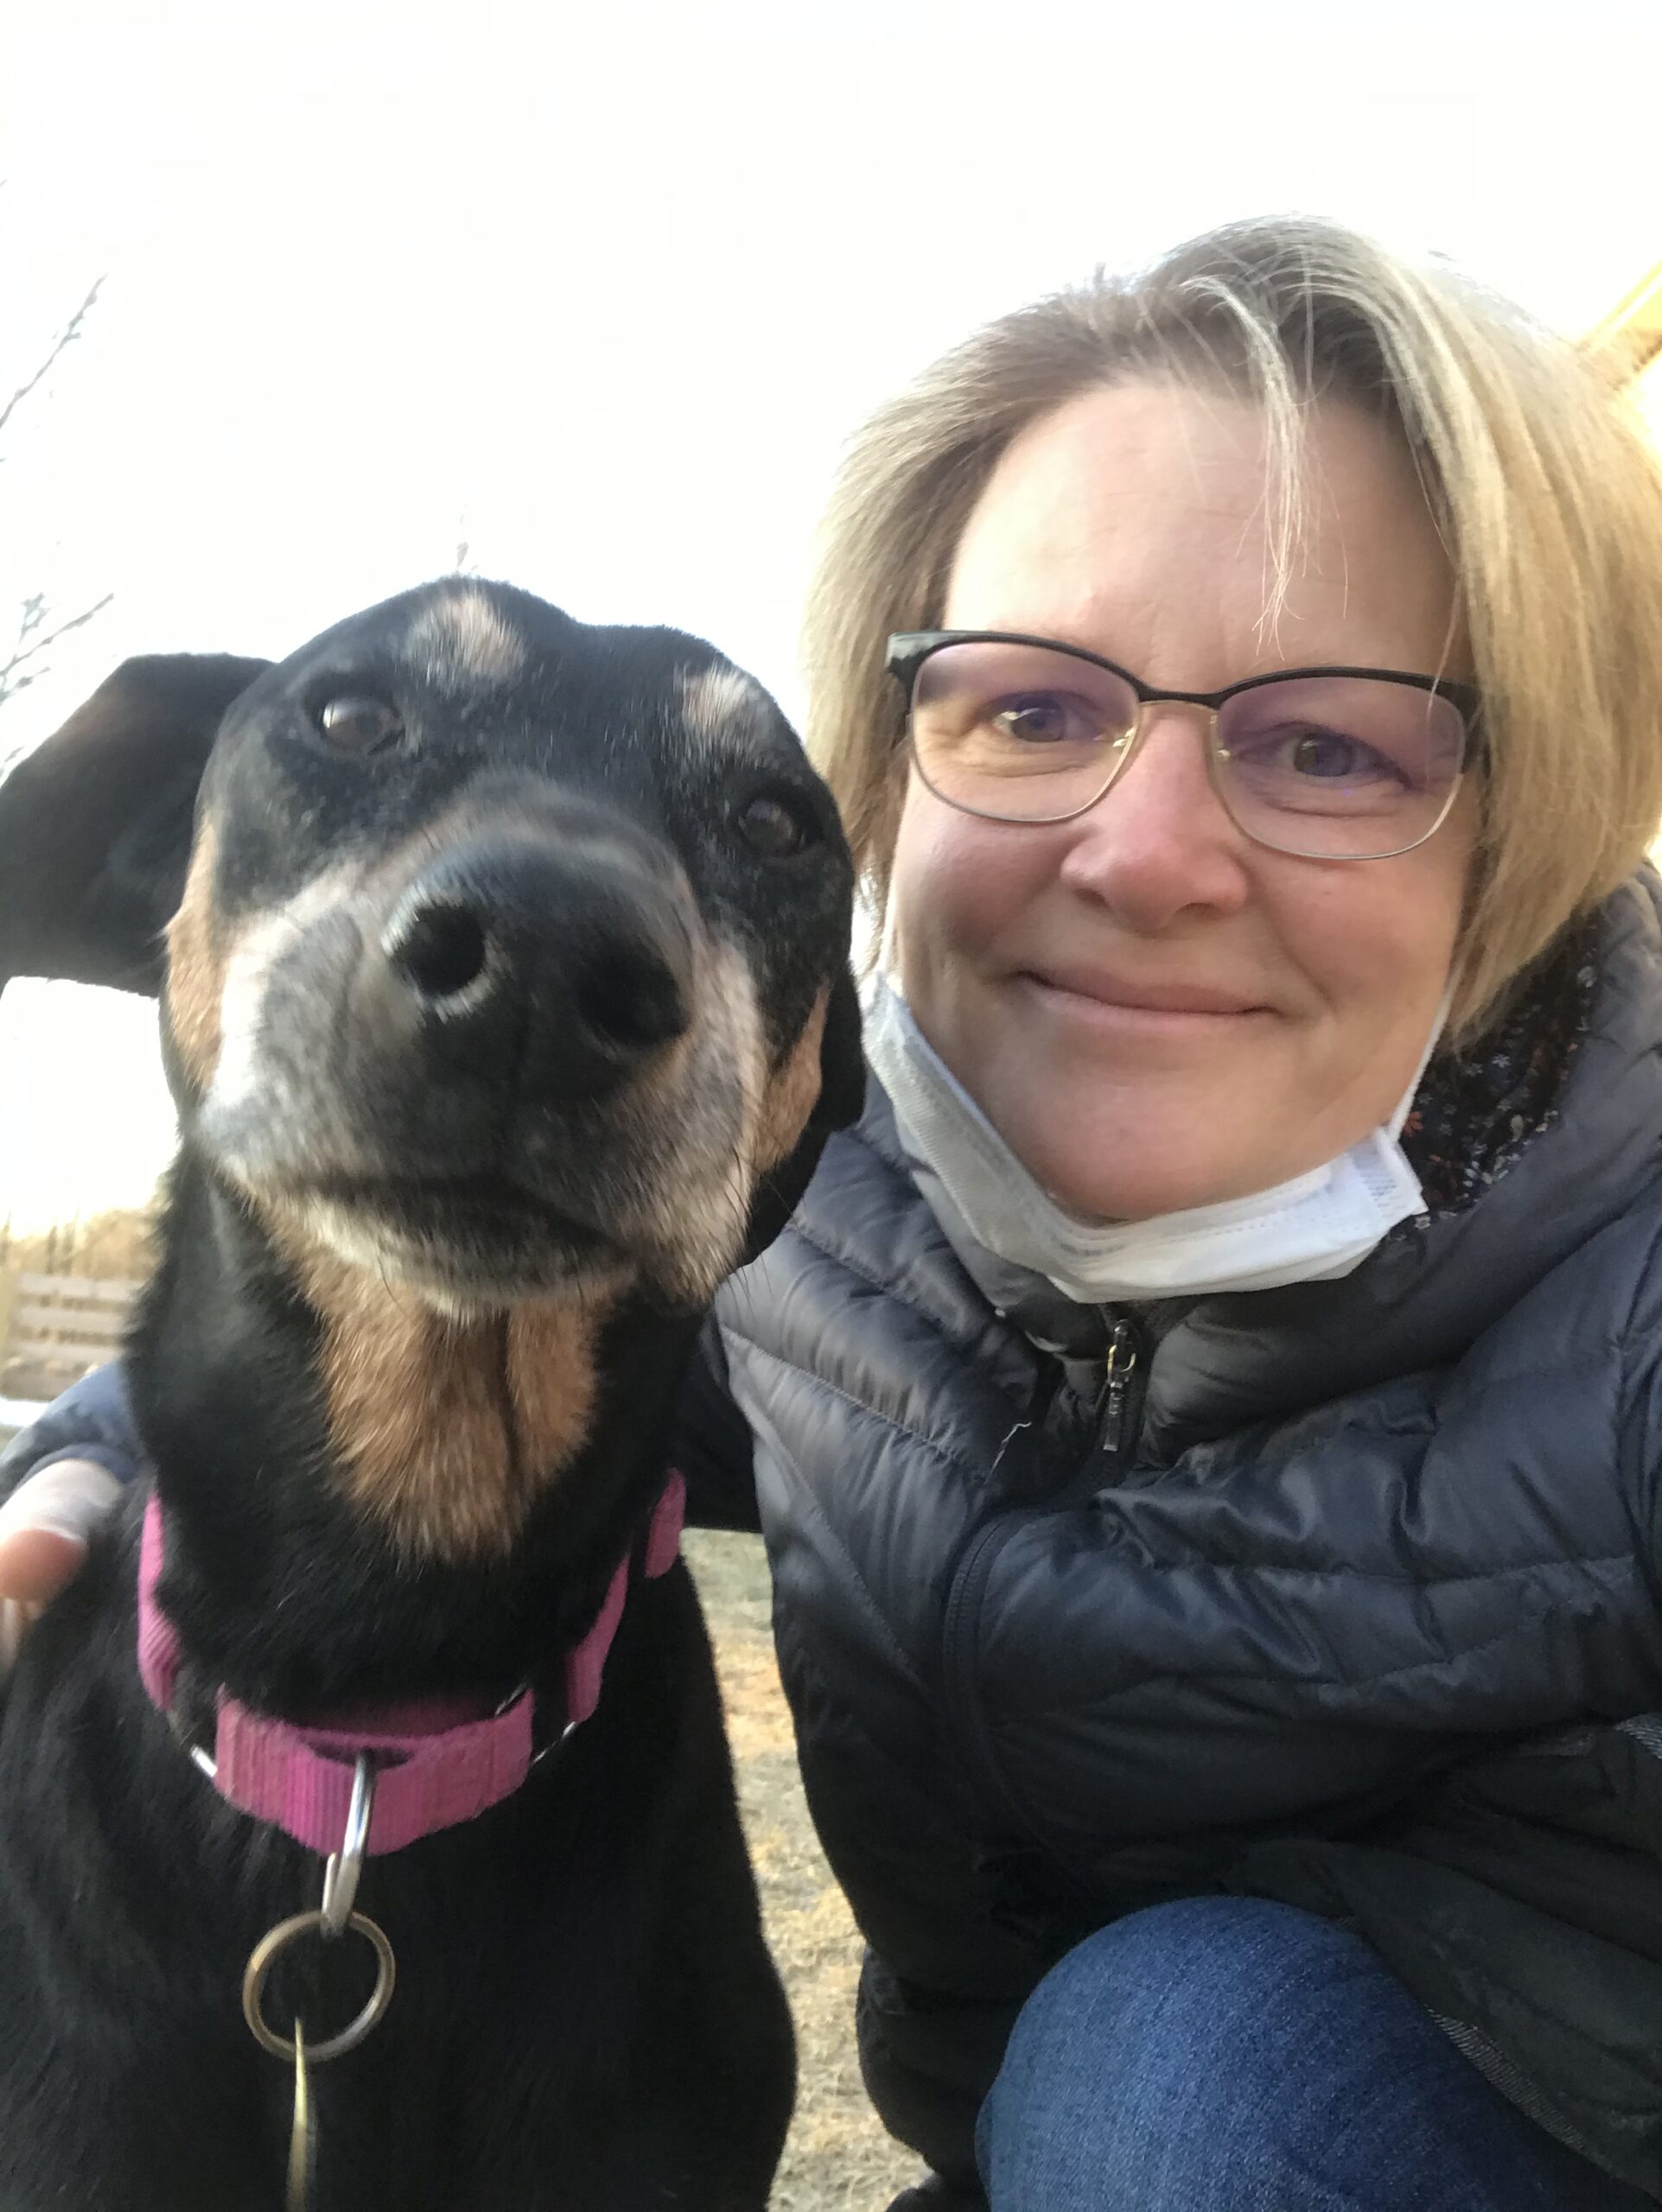 Patricia, Ann Arbor pet sitter and dog walker